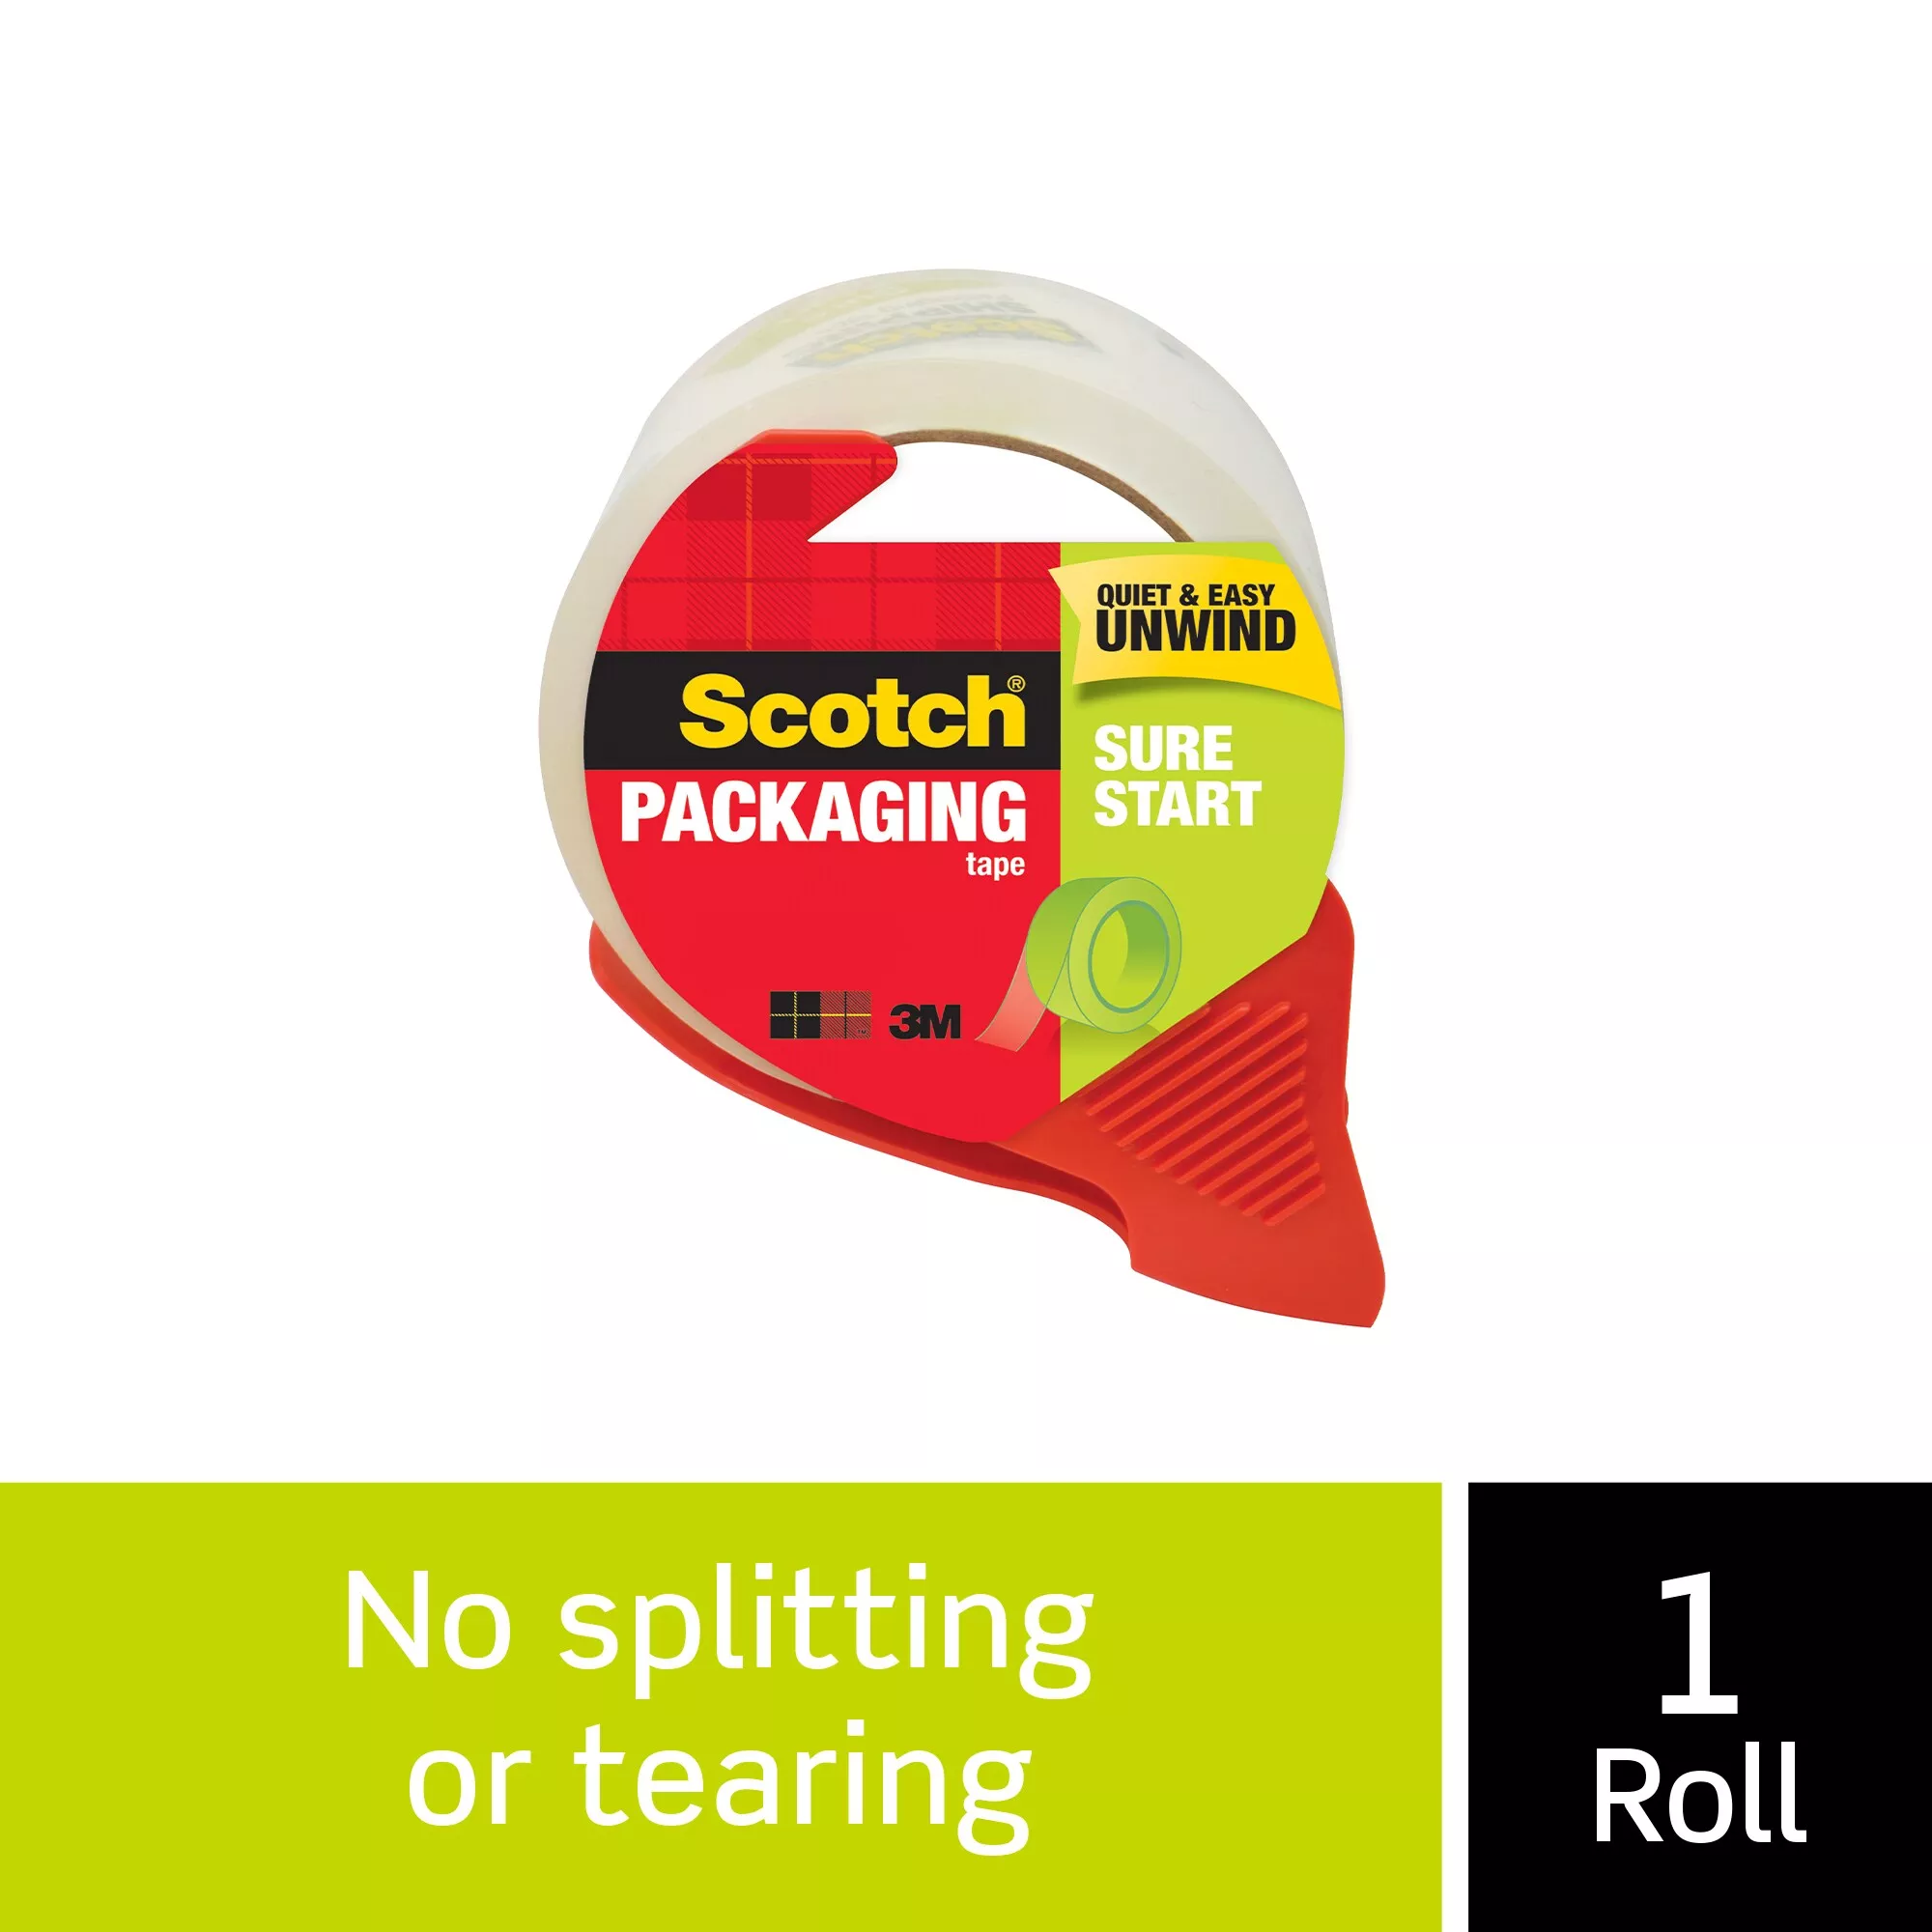 Scotch® Packaging Tape 3450S-RD-36GC, 1.88 in x 38.2 yd (48 mm x 35 m)